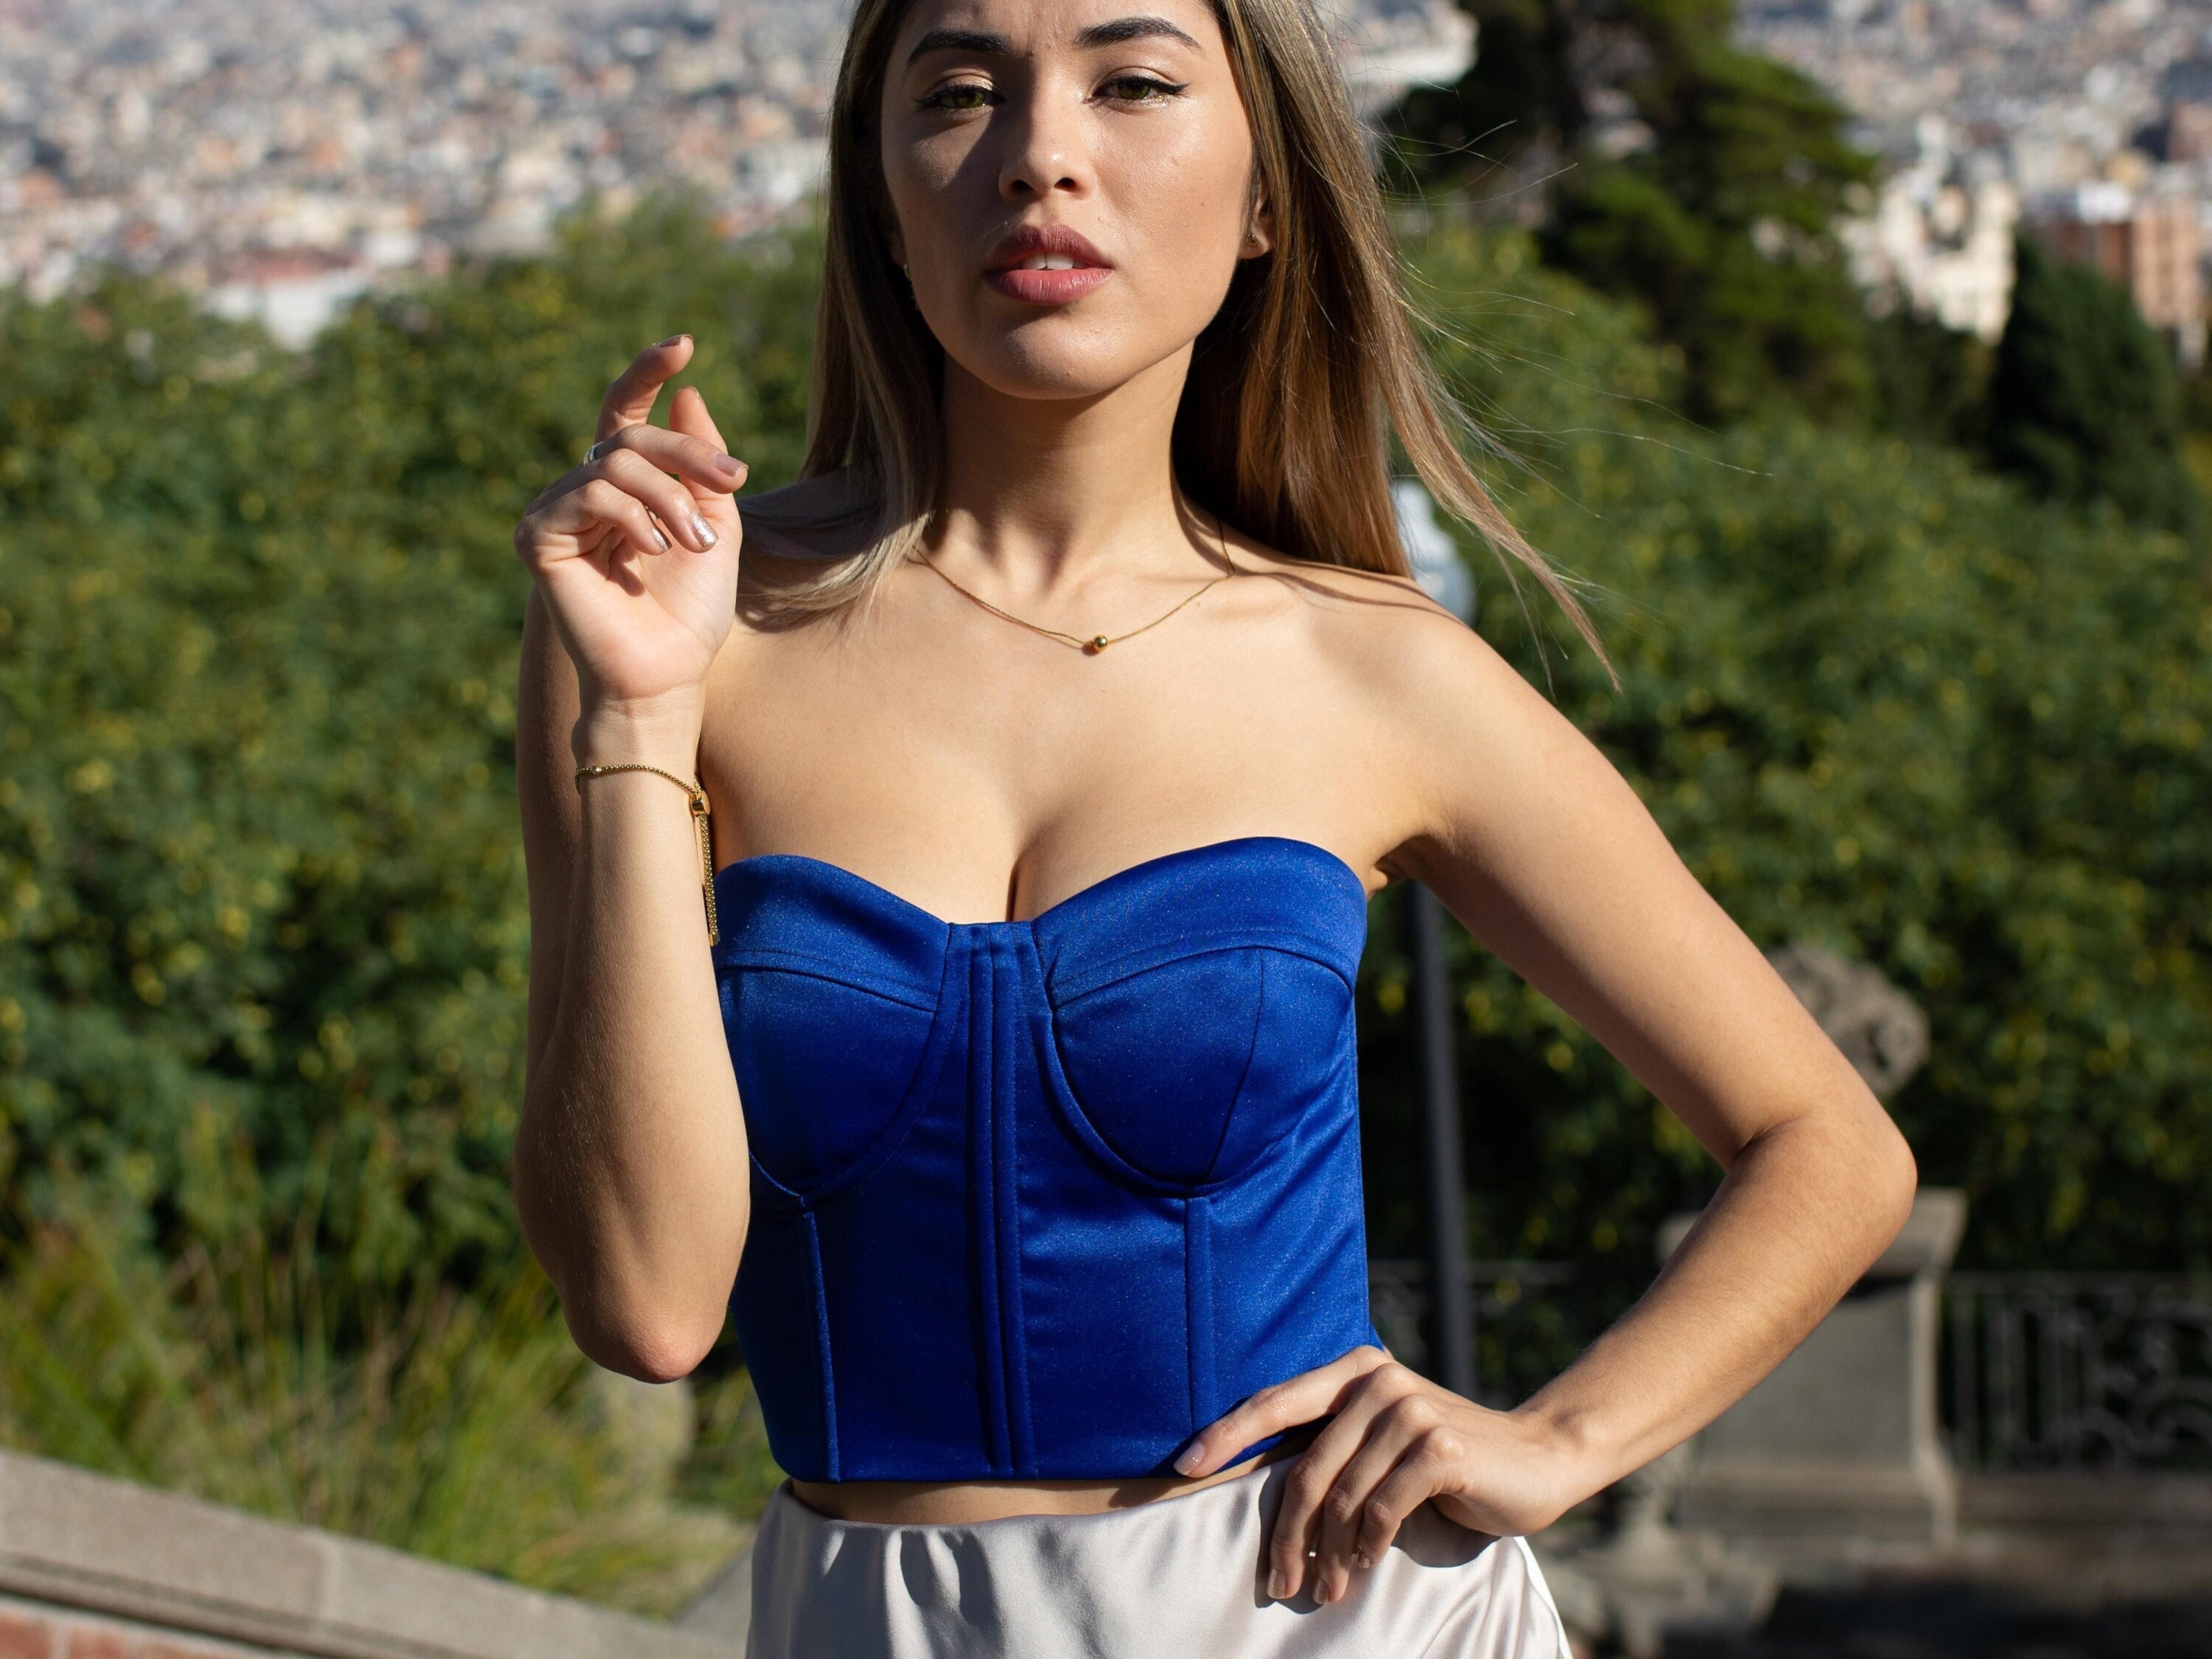 Strapless Royal Blue Corset Bustier/ Retro-style Bustier Top/ Electric Blue  Strapless Bustier Corset/ Stylized Corset for Luxury Guests -  Australia